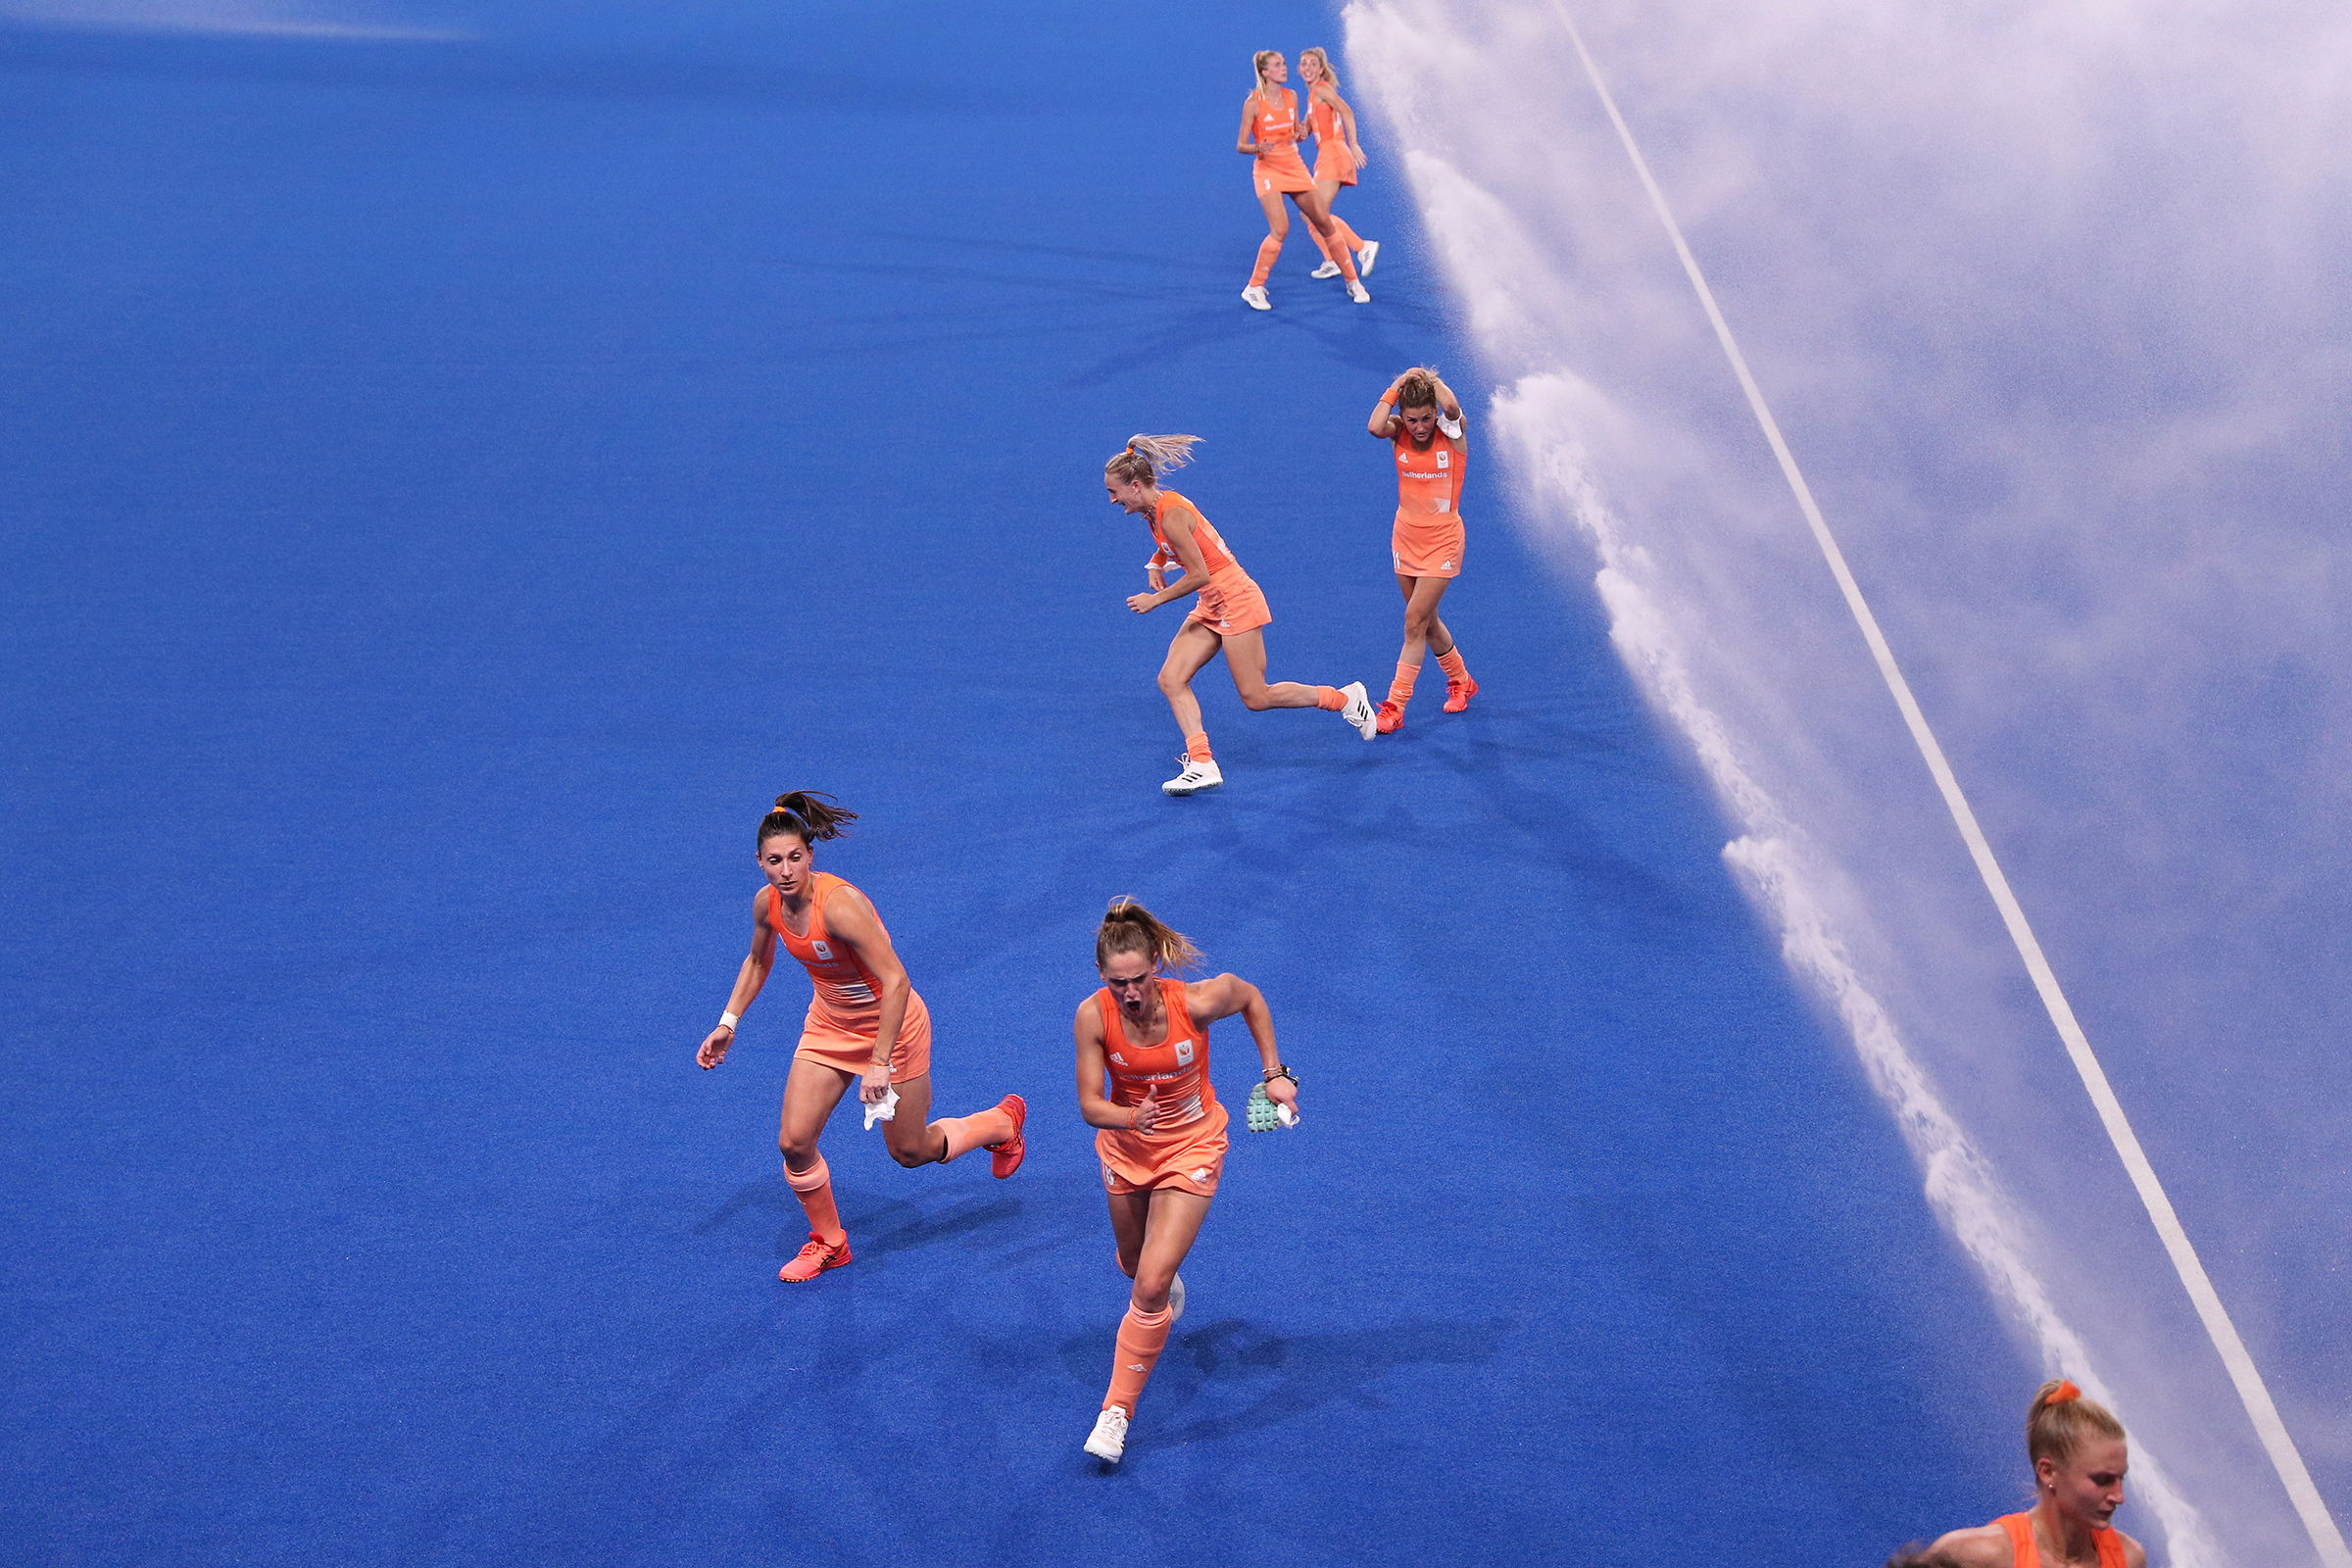 Members of Team Netherlands run from sprinklers ahead of a field hockey match against Germany that determined the Pool A winner at the Tokyo Olympics on July 31. Netherlands won 3-1.